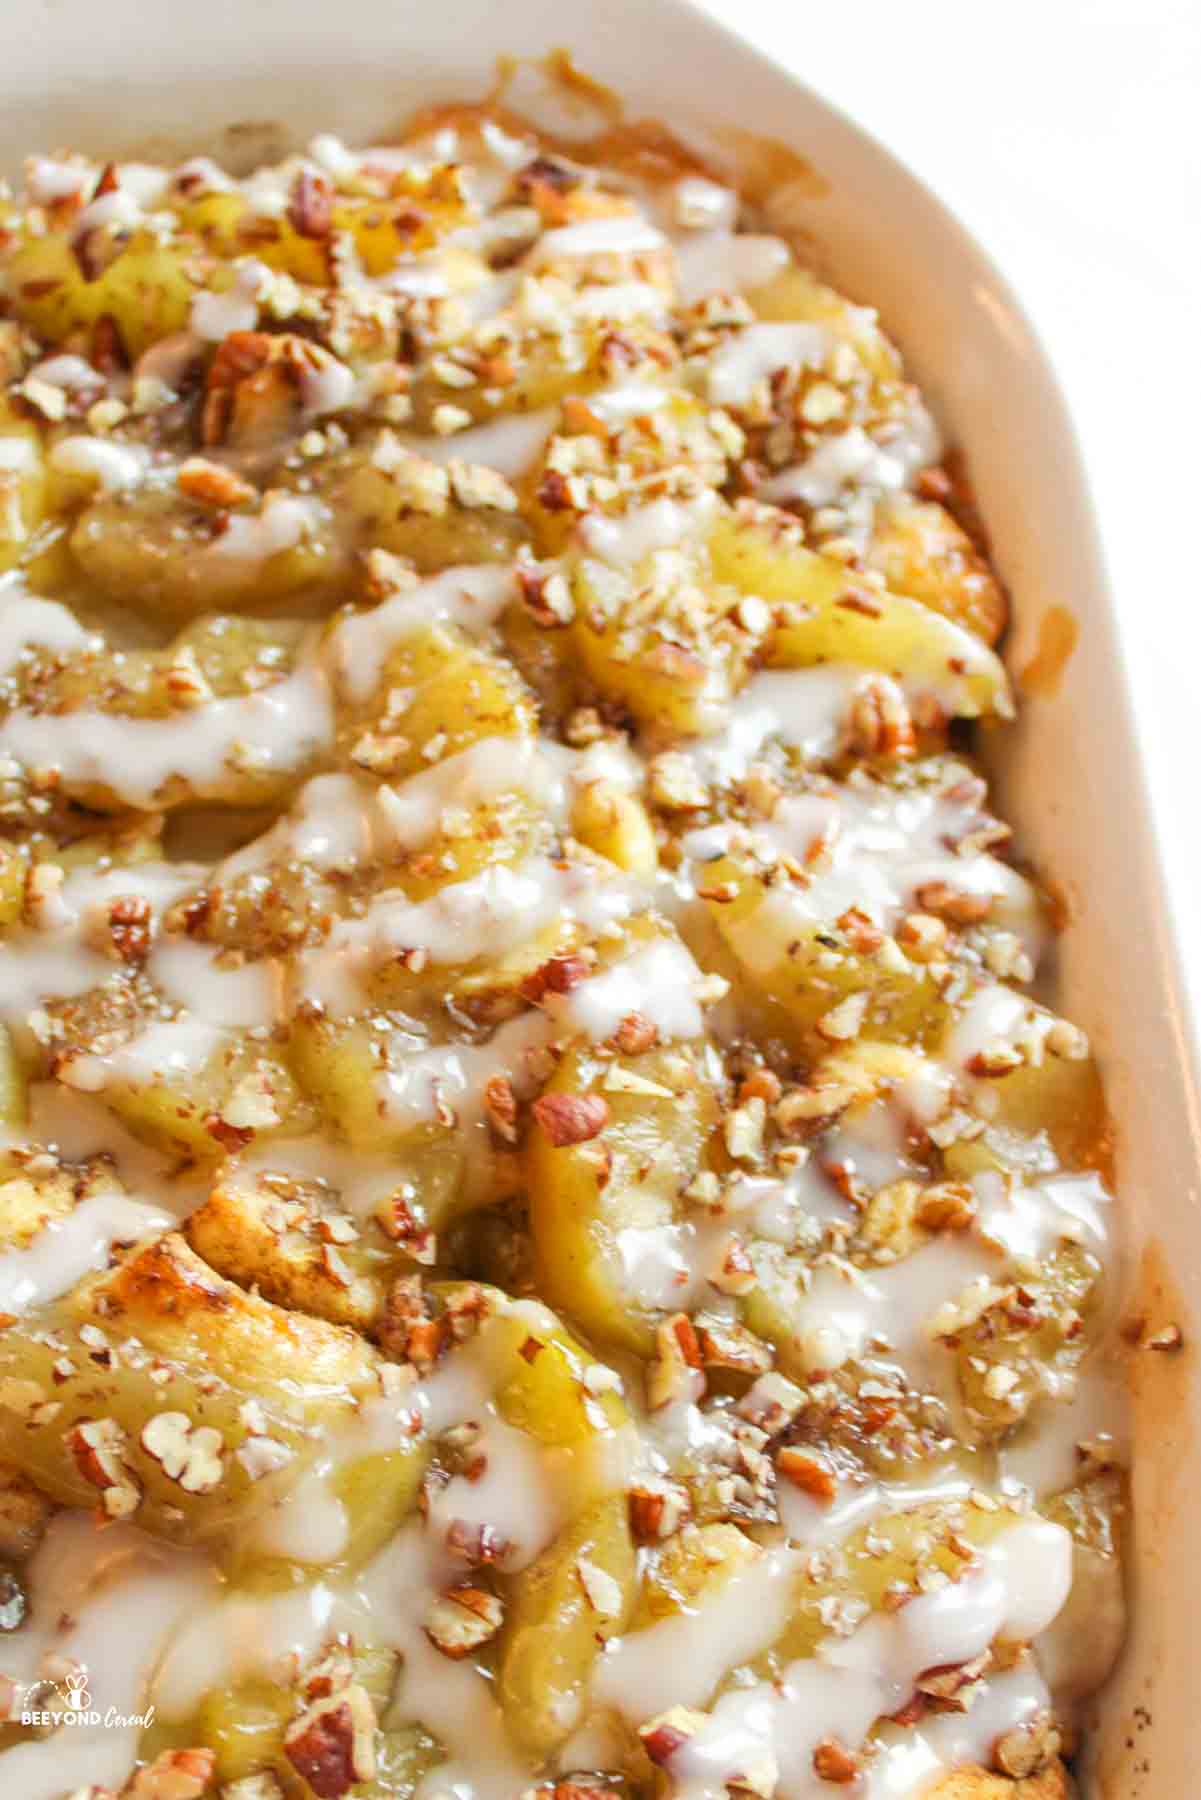 an upclose view of half the pan of cinnamon roll apple cobbler with icing and pecans on top